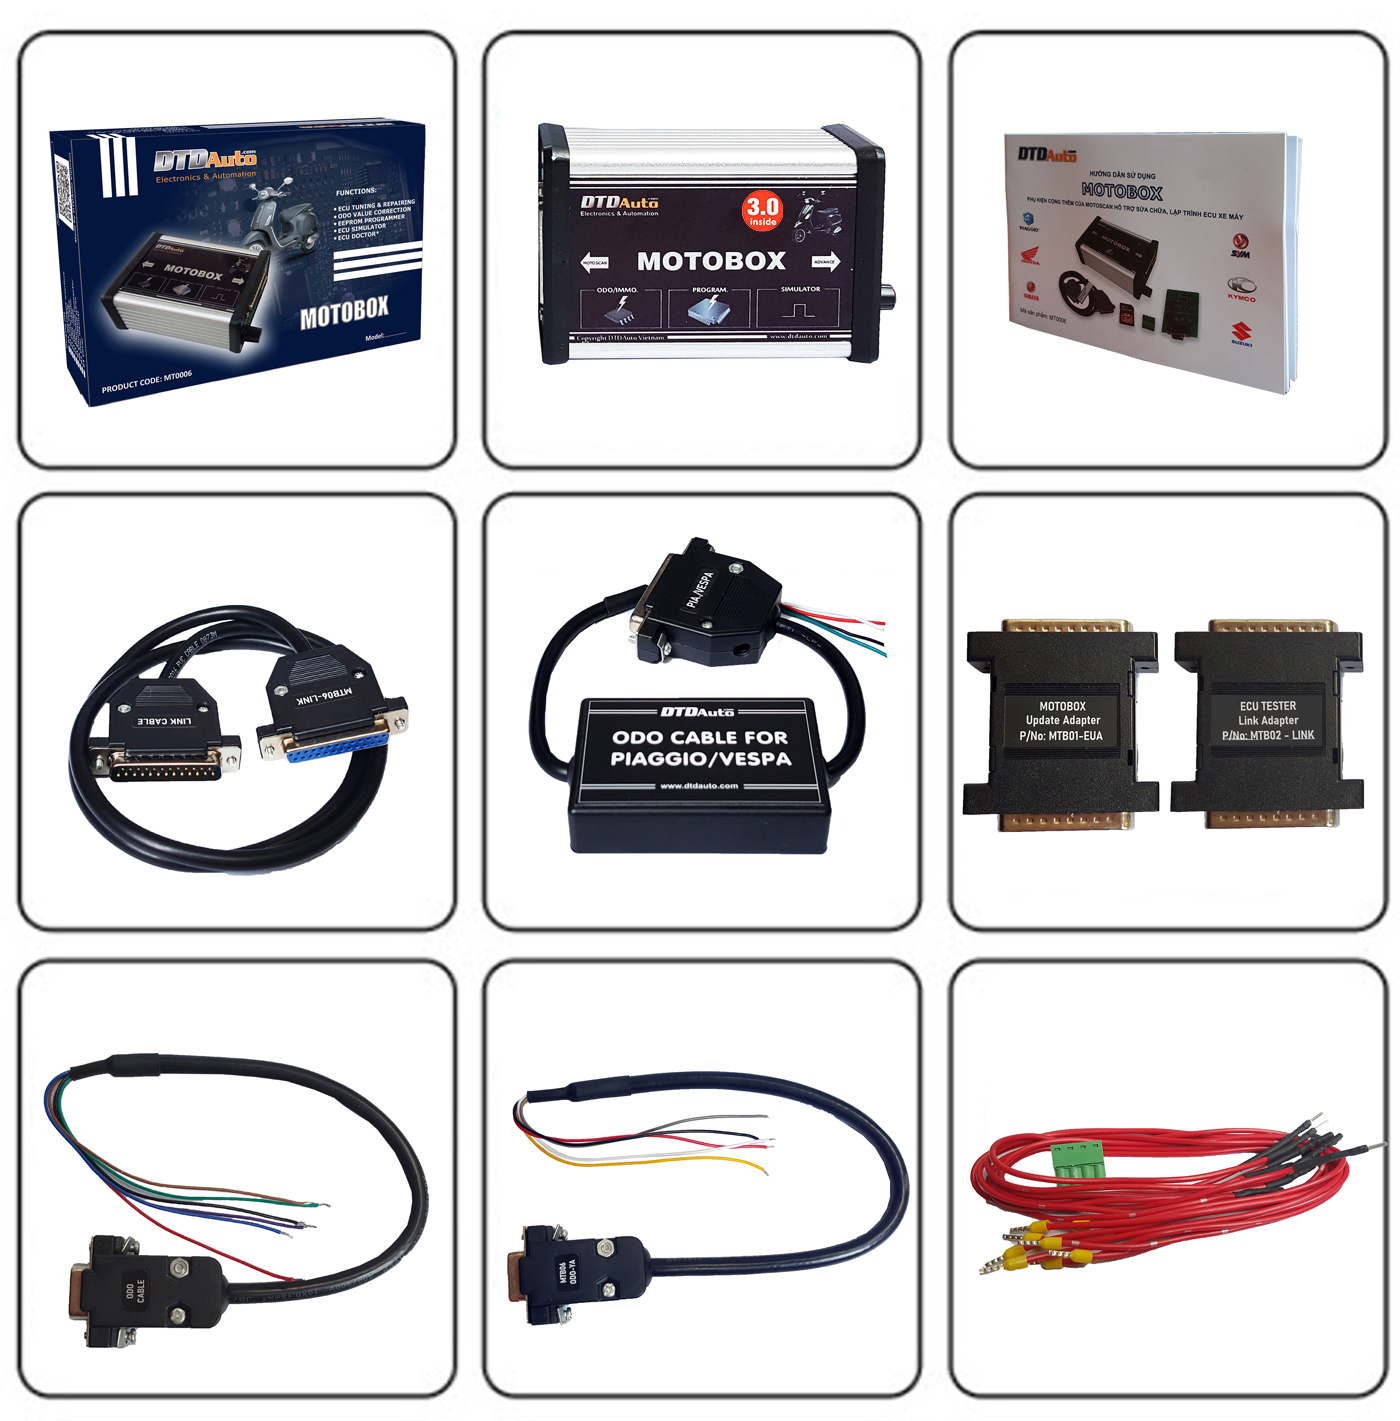 MOTOBOX – AN ACCESSORY OF MOTOSCAN TO REPAIR, REINSTALL AND UPGRADE THE ECU FIRMWARE FOR MOTORCYCLE/ SCOOTER